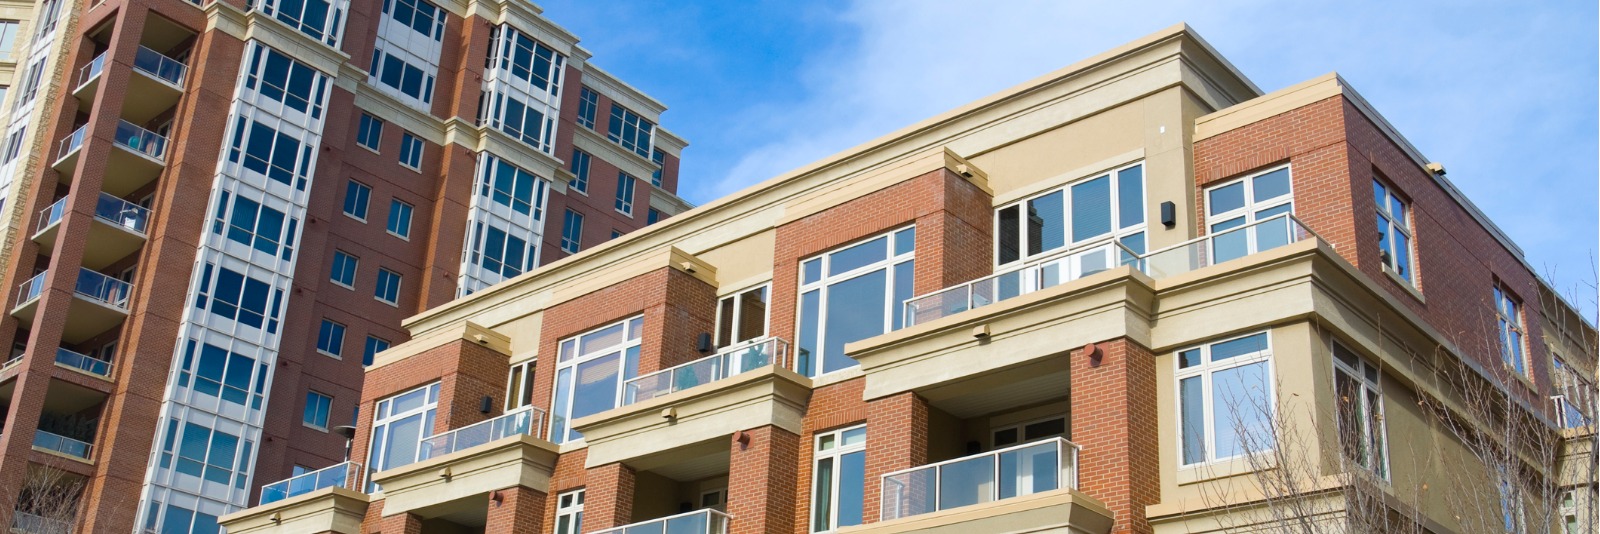 Does your condo insurance have deductible coverage?